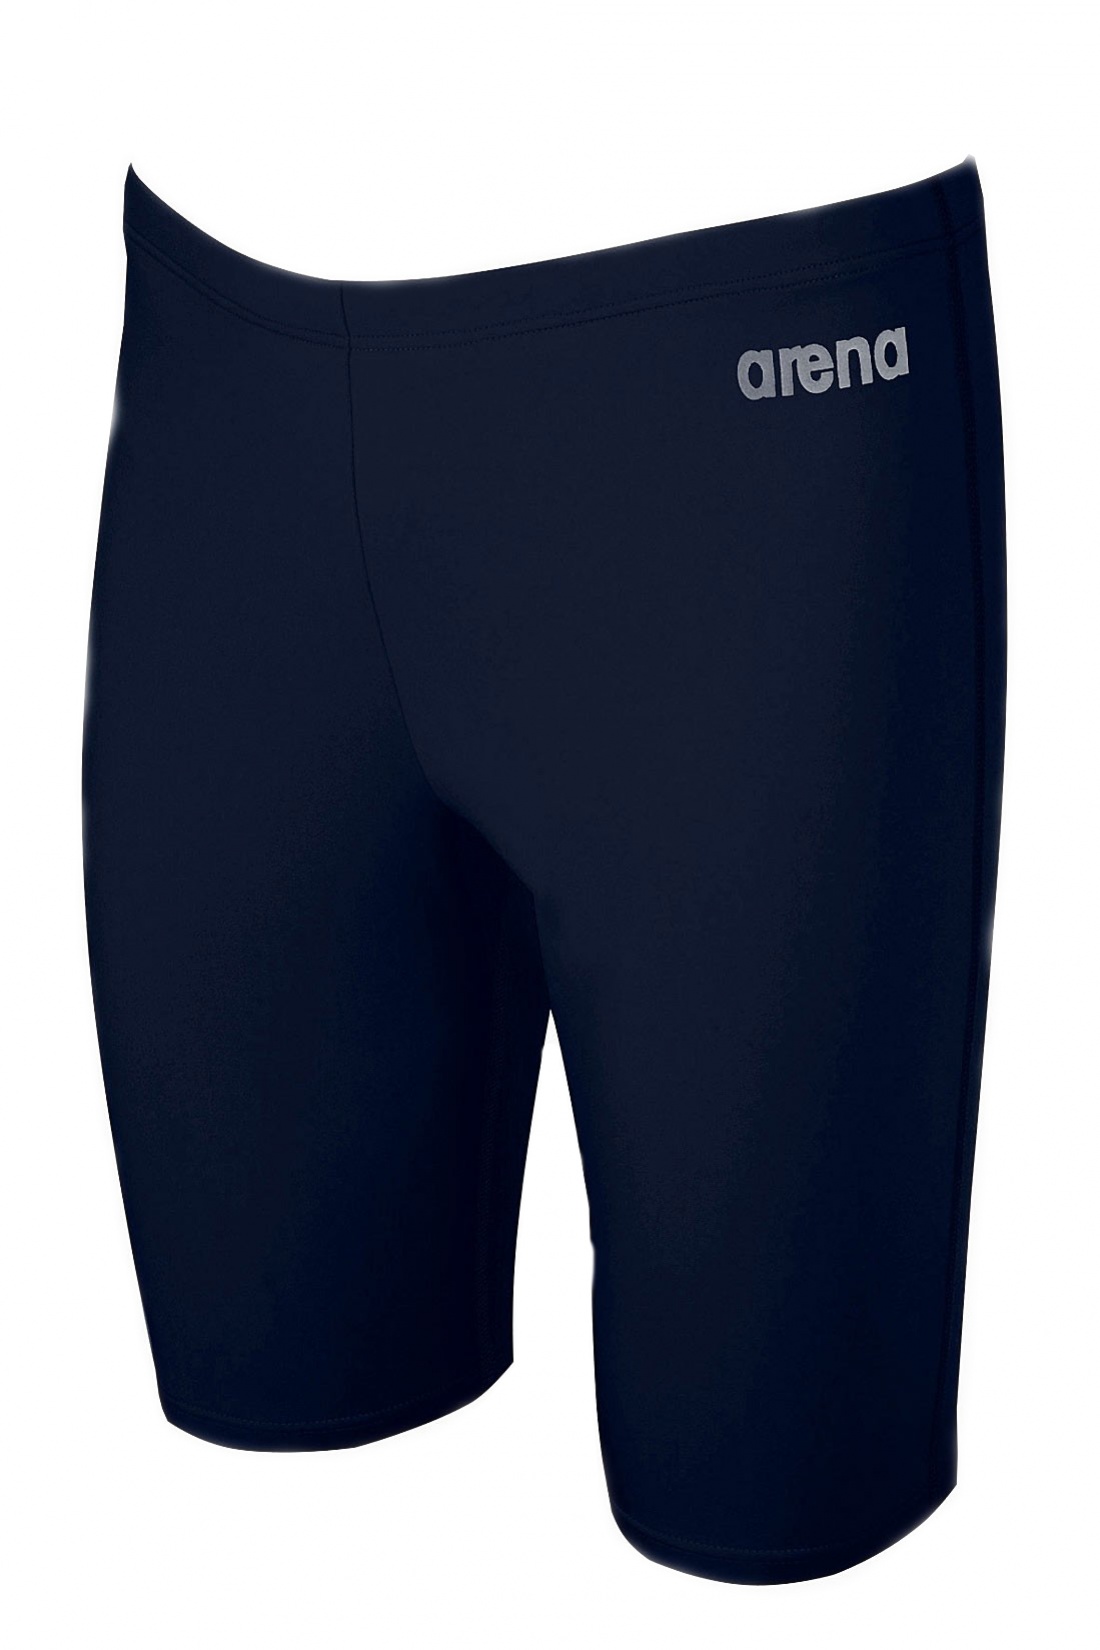 Chlapecké plavky arena solid jammer junior navy 29